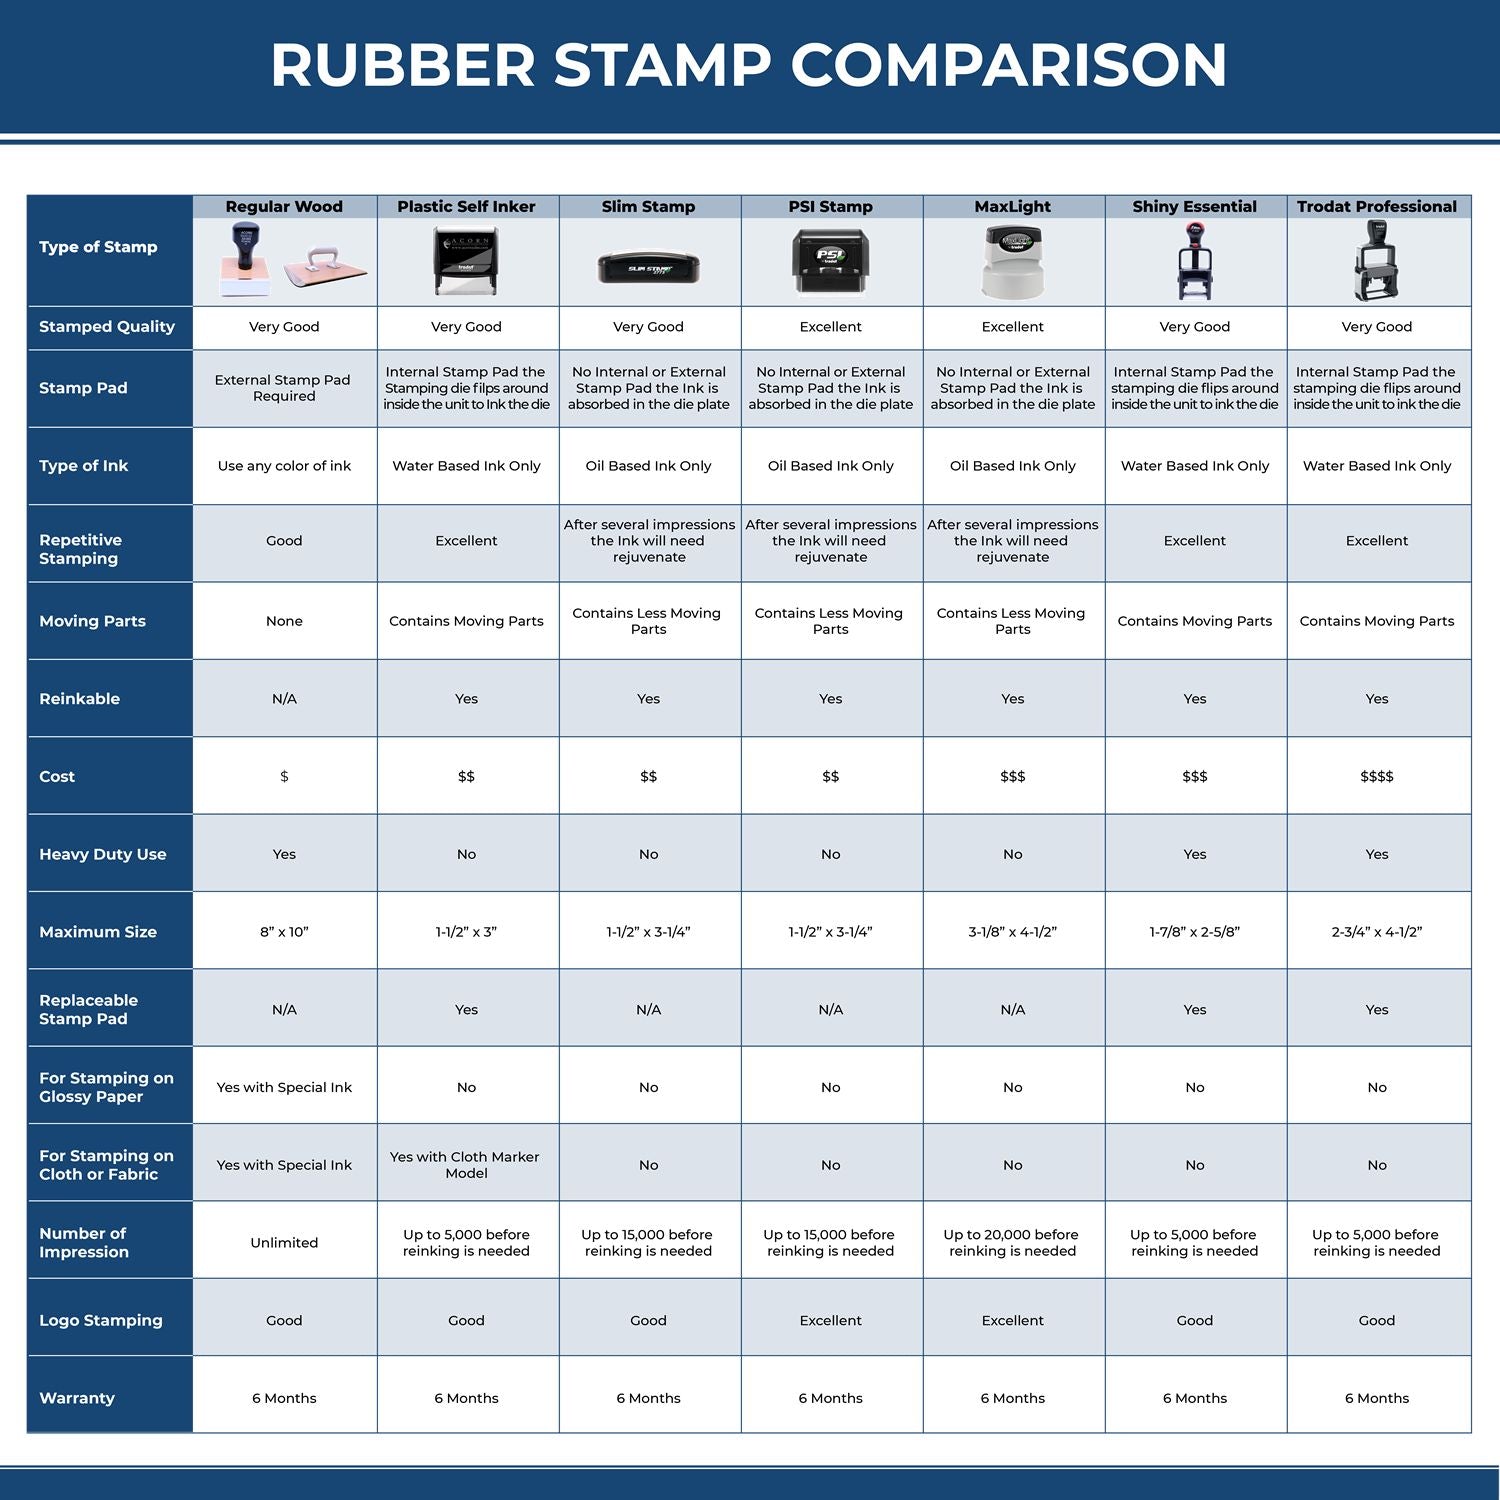 A comparison chart for the different types of mount models available for the Mississippi Professional Engineer Seal Stamp.